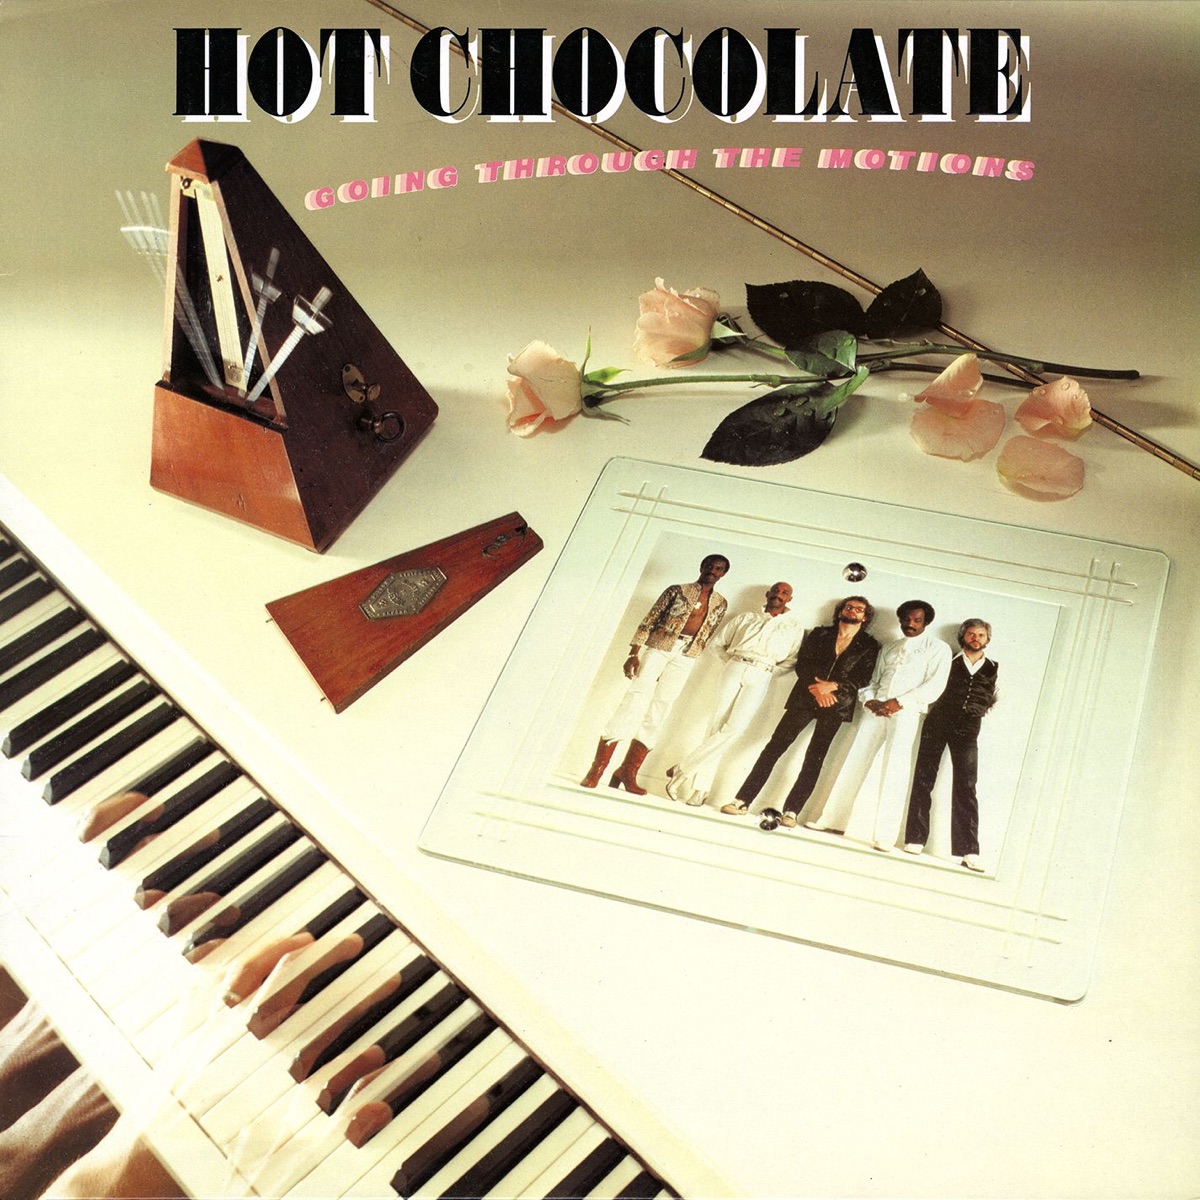 Hot Chocolate — Going Through the Motions cover artwork